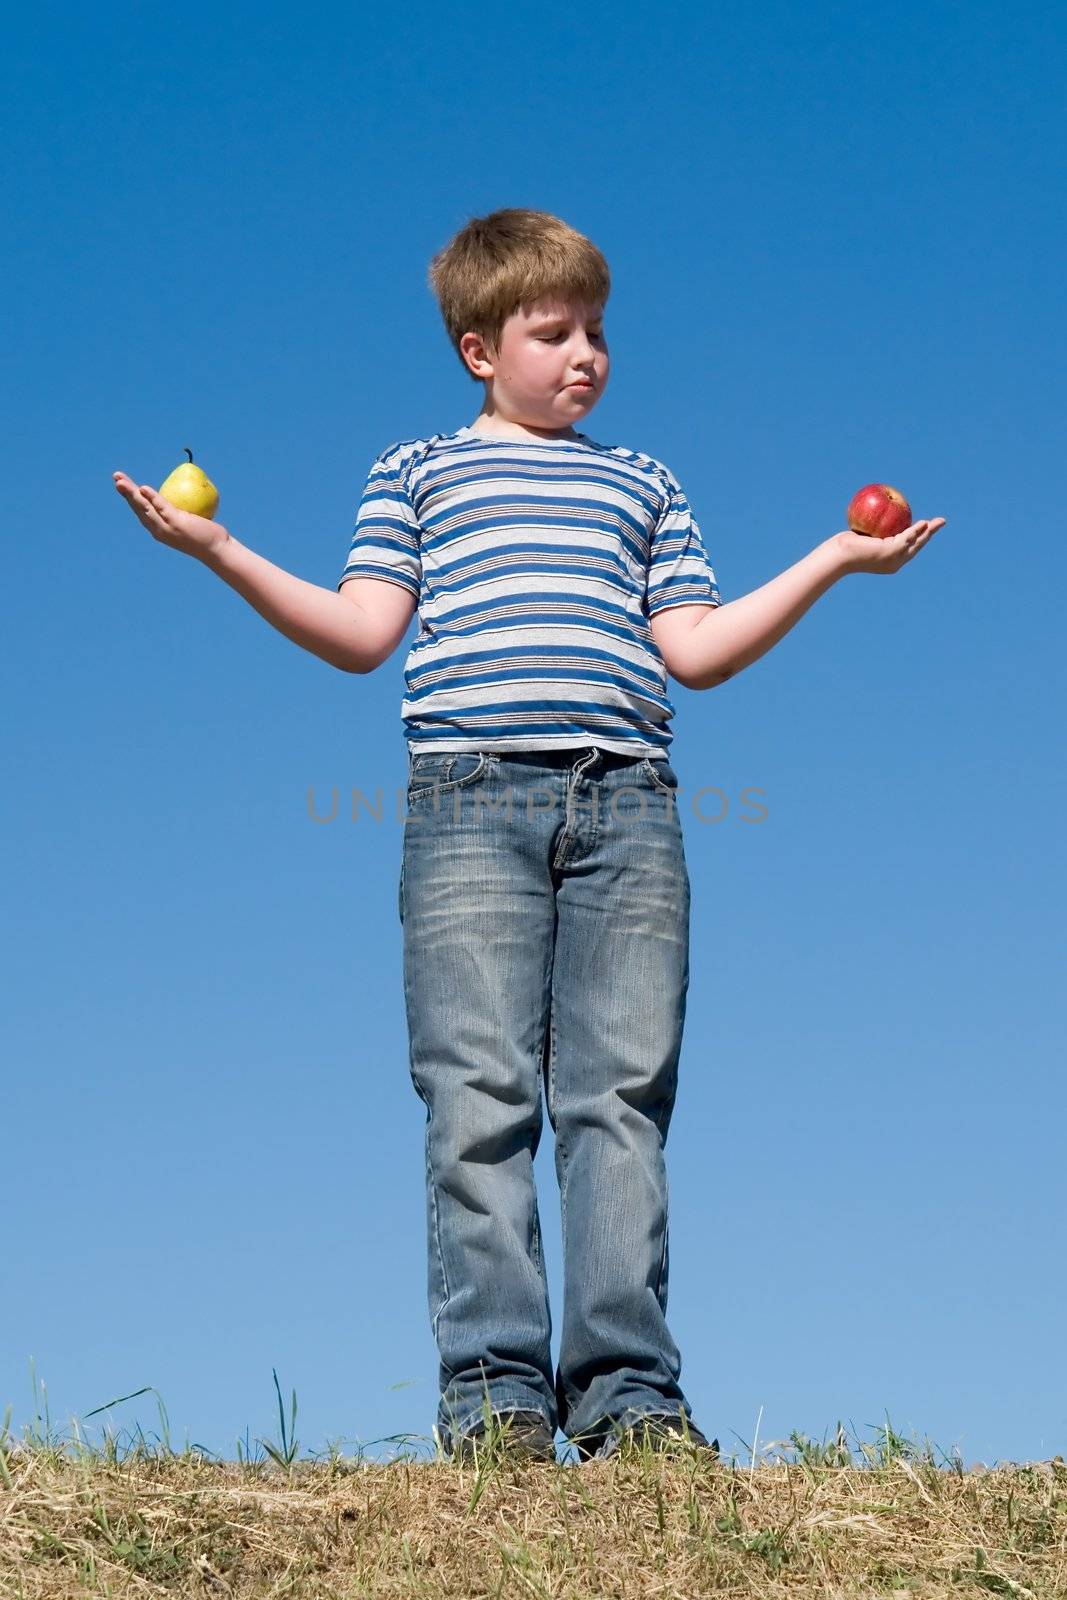 Difficult selection. Apple or pear? Boy with sky at background.